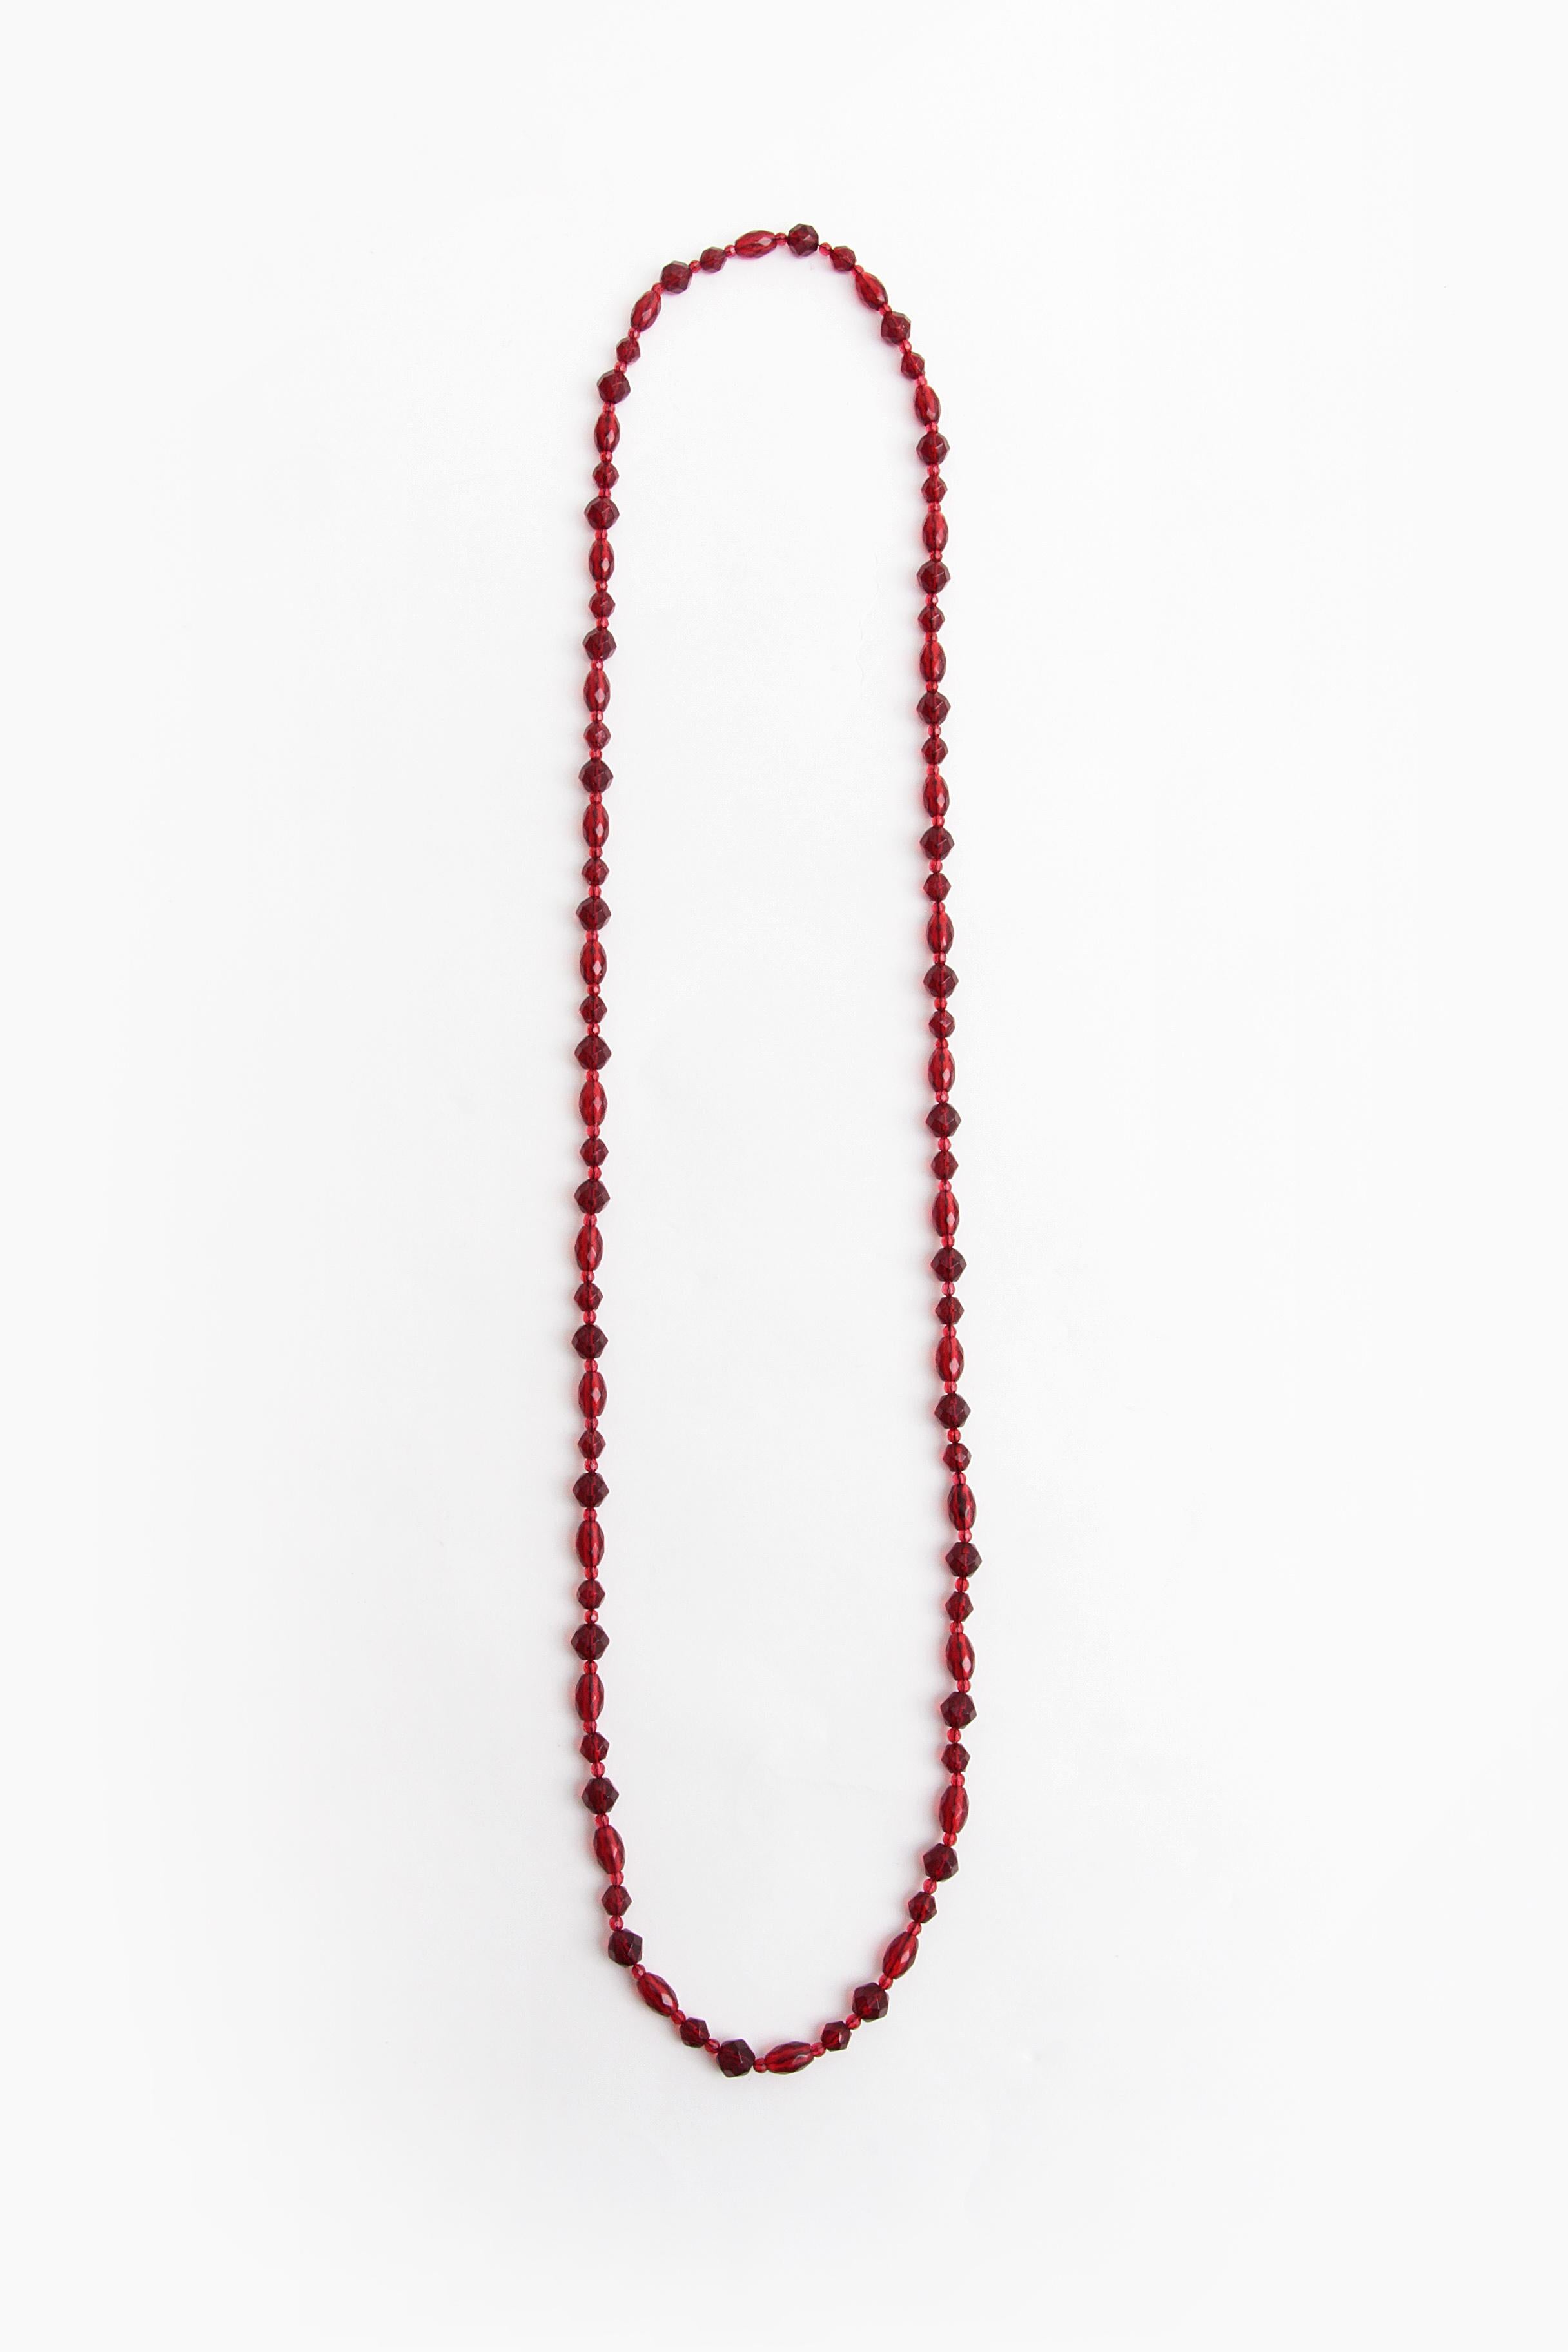 Do you also want to wear something nice and especially something that others don't have, this might be something for you. These beads have a beautiful red color.

This is an amber necklace which is strung with irregular pieces of amber, and